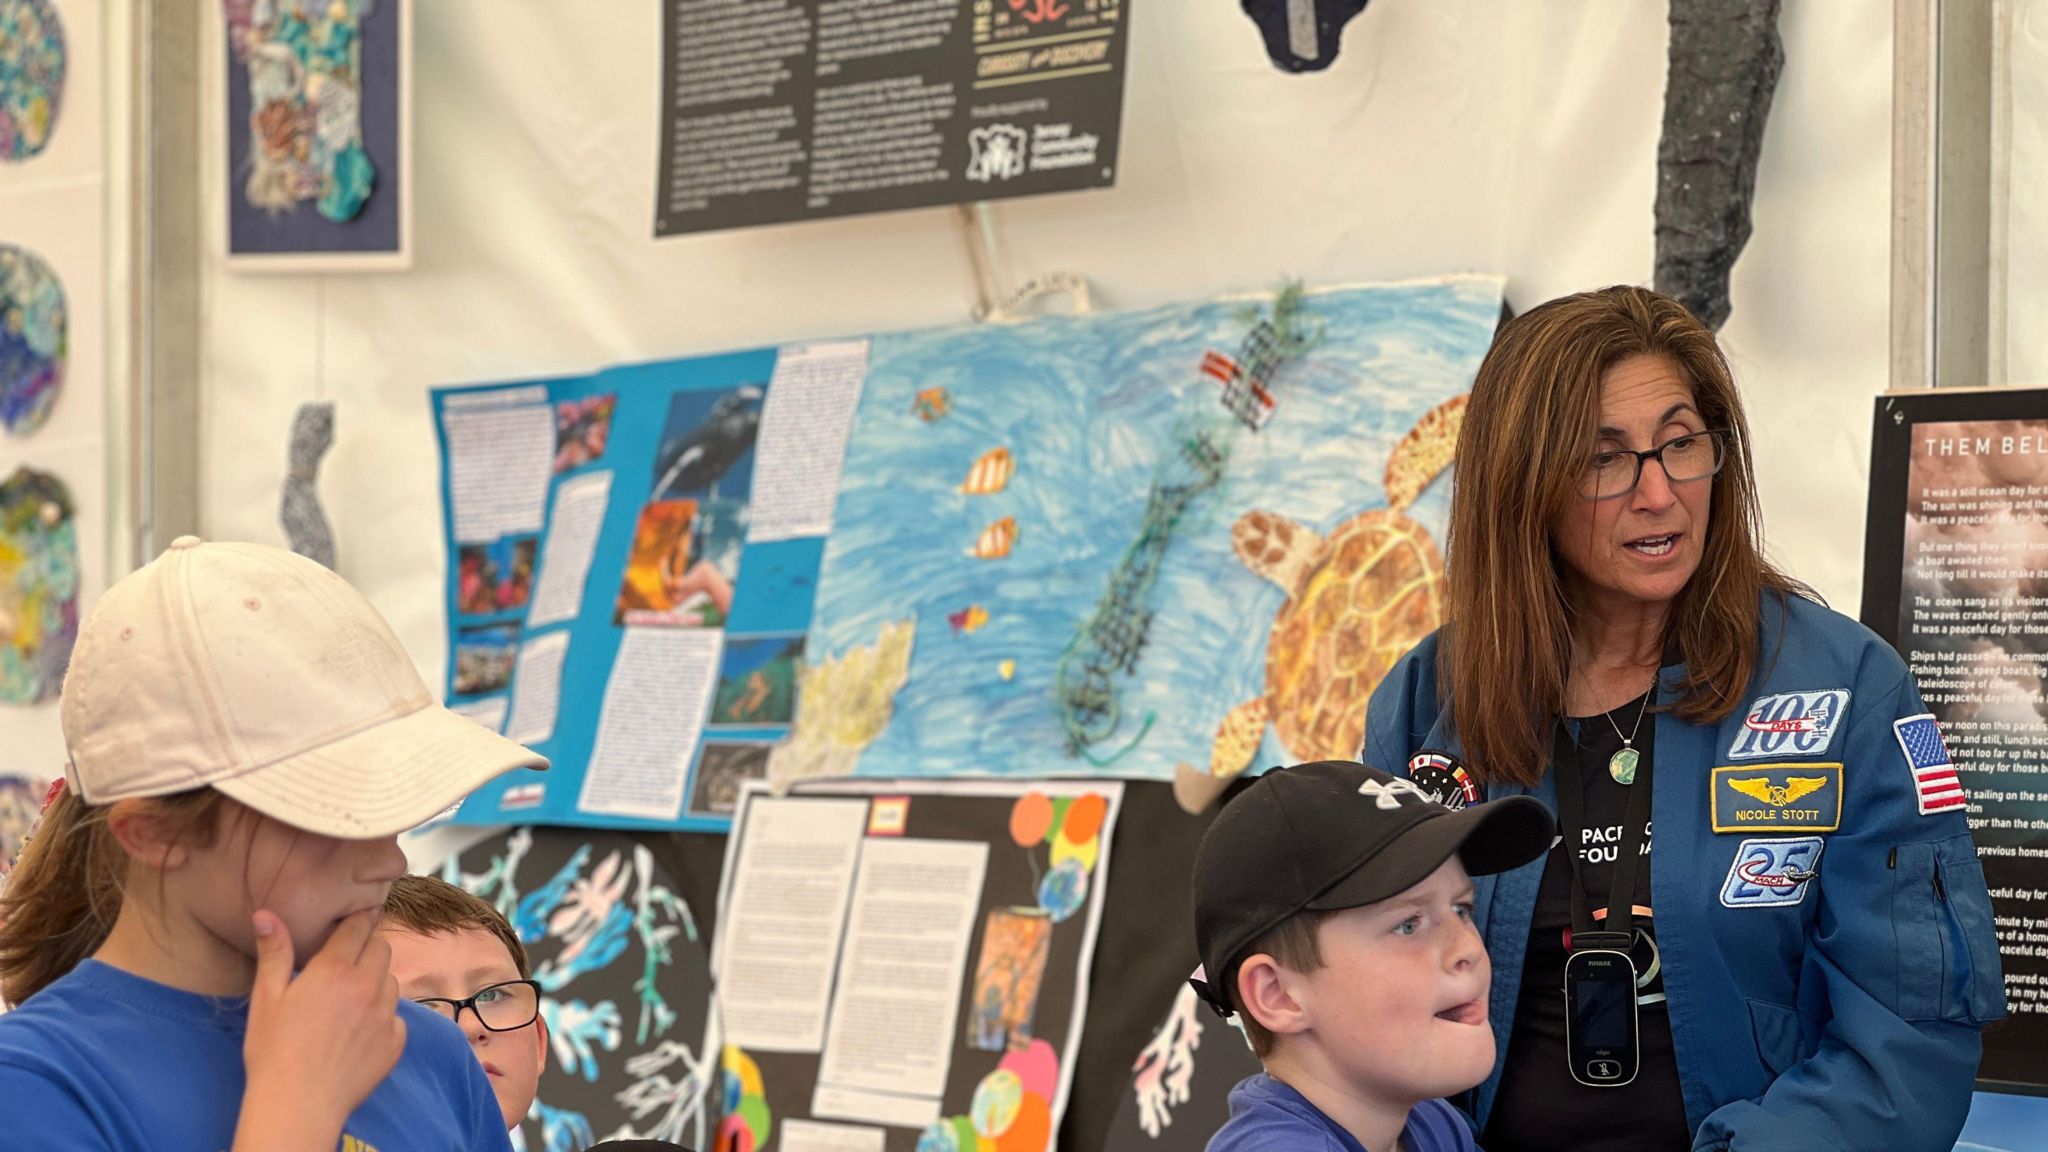 Nicole Stott is wearing a special astronaut jacket and sits next to some sea artwork and speaks to children sitting in front of her